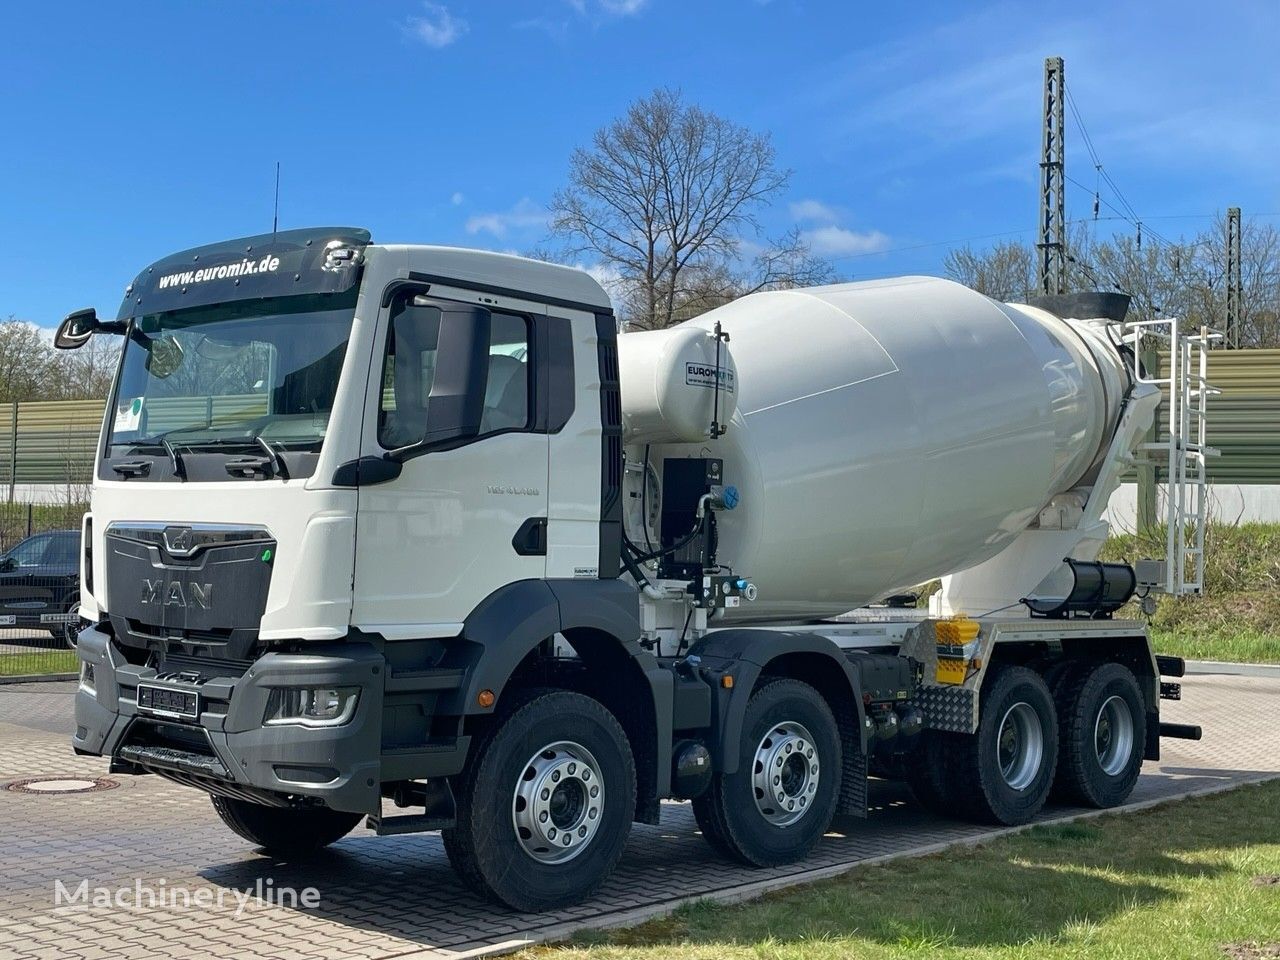 new Euromix MTP  on chassis MAN TGS 41.400 concrete mixer truck